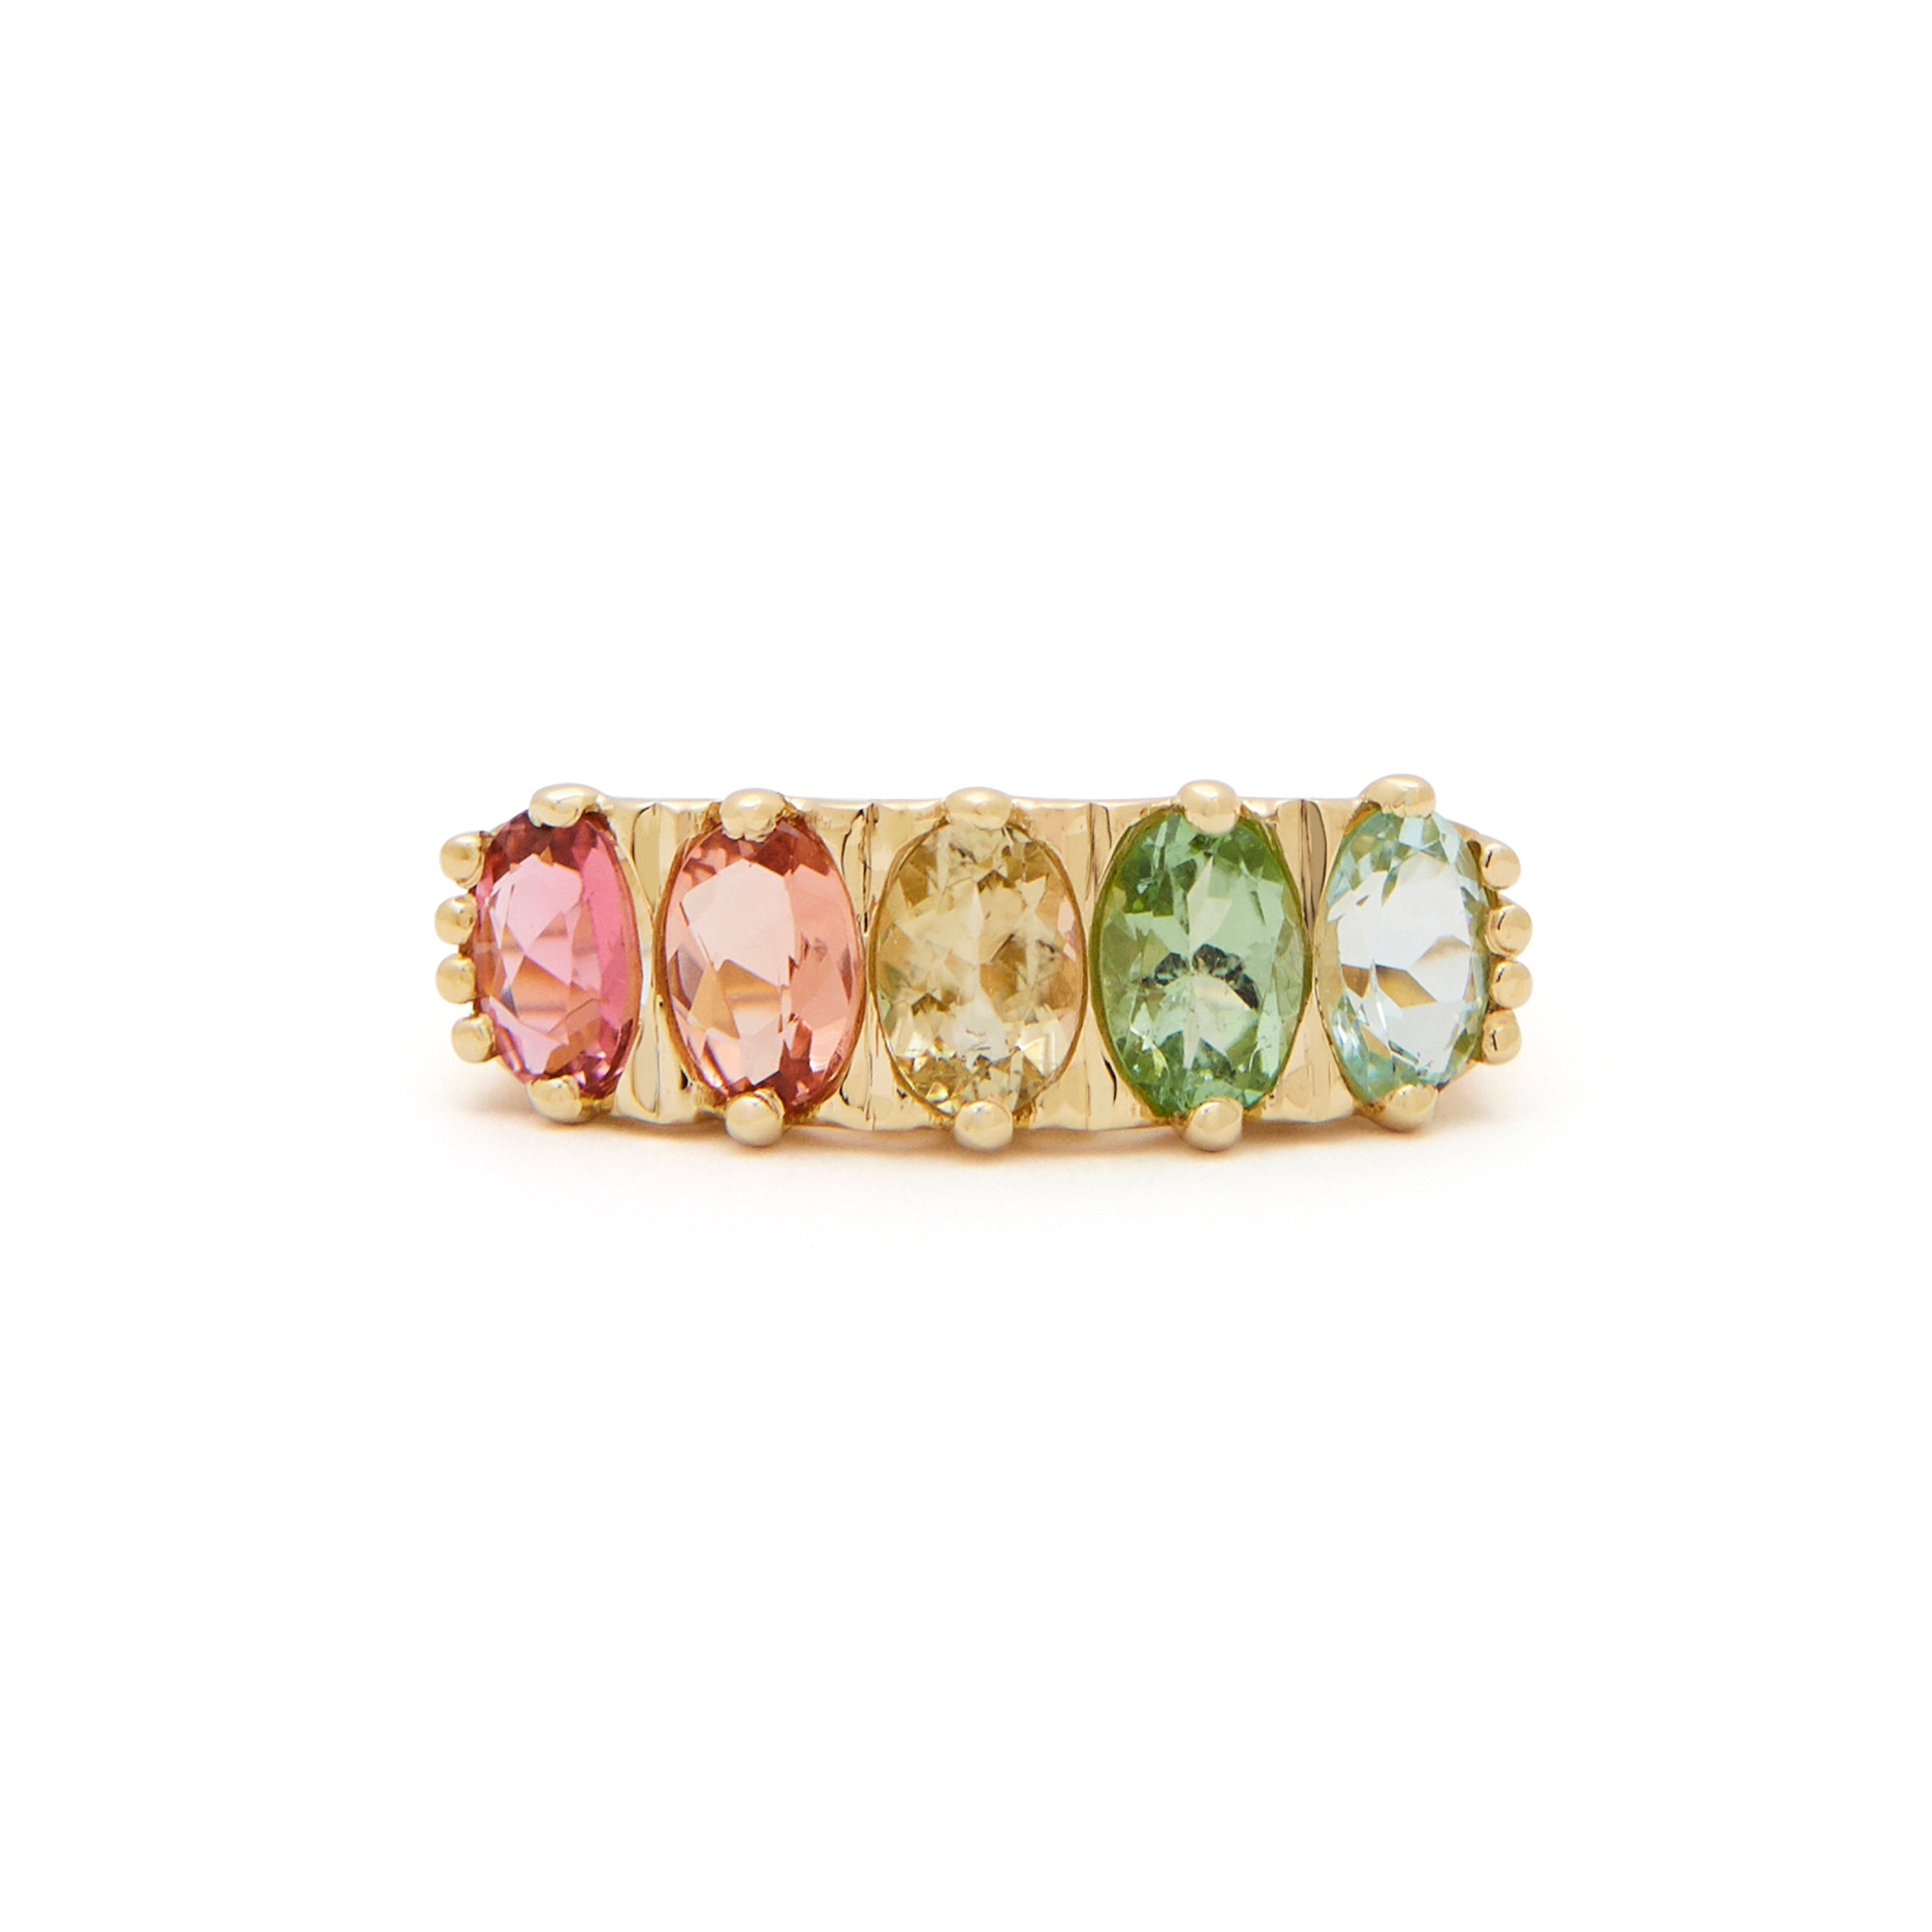 The F&B Pastel Ombre Ring